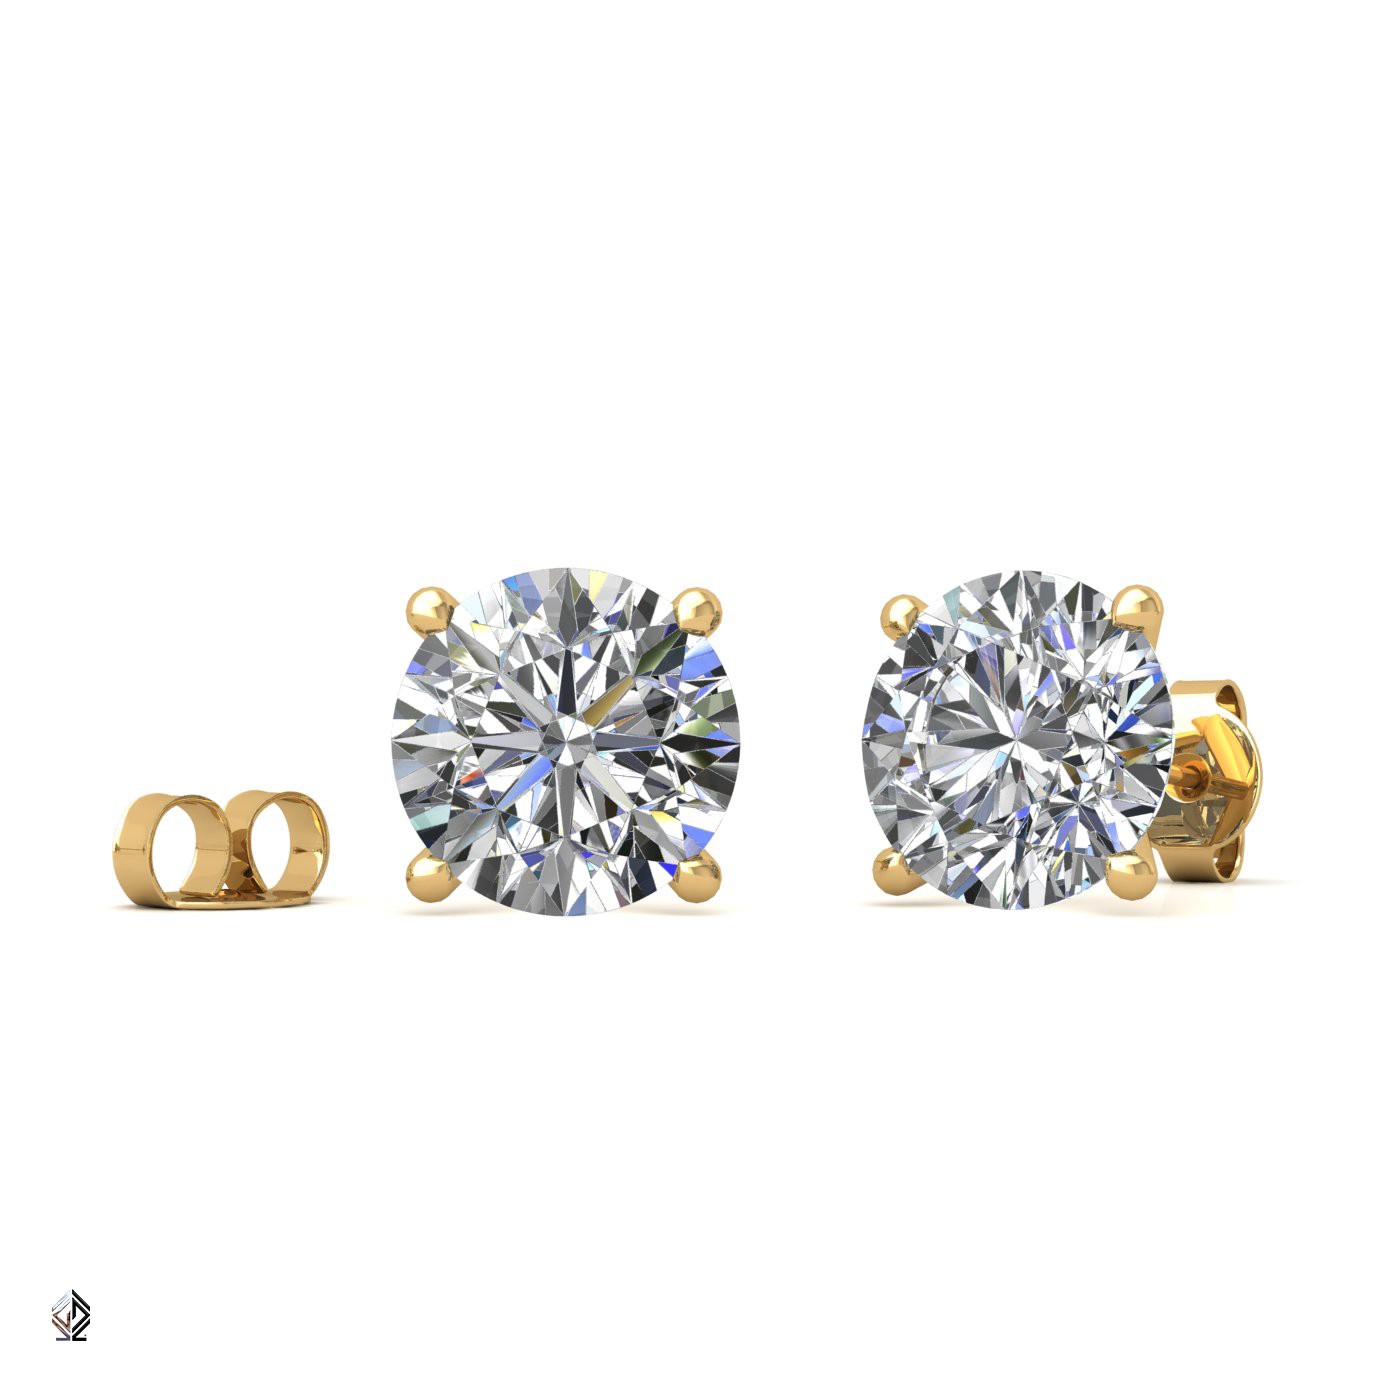 18k yellow gold 0,7 ct each (1,4 tcw) 4 prongs round cut classic diamond earring studs Photos & images